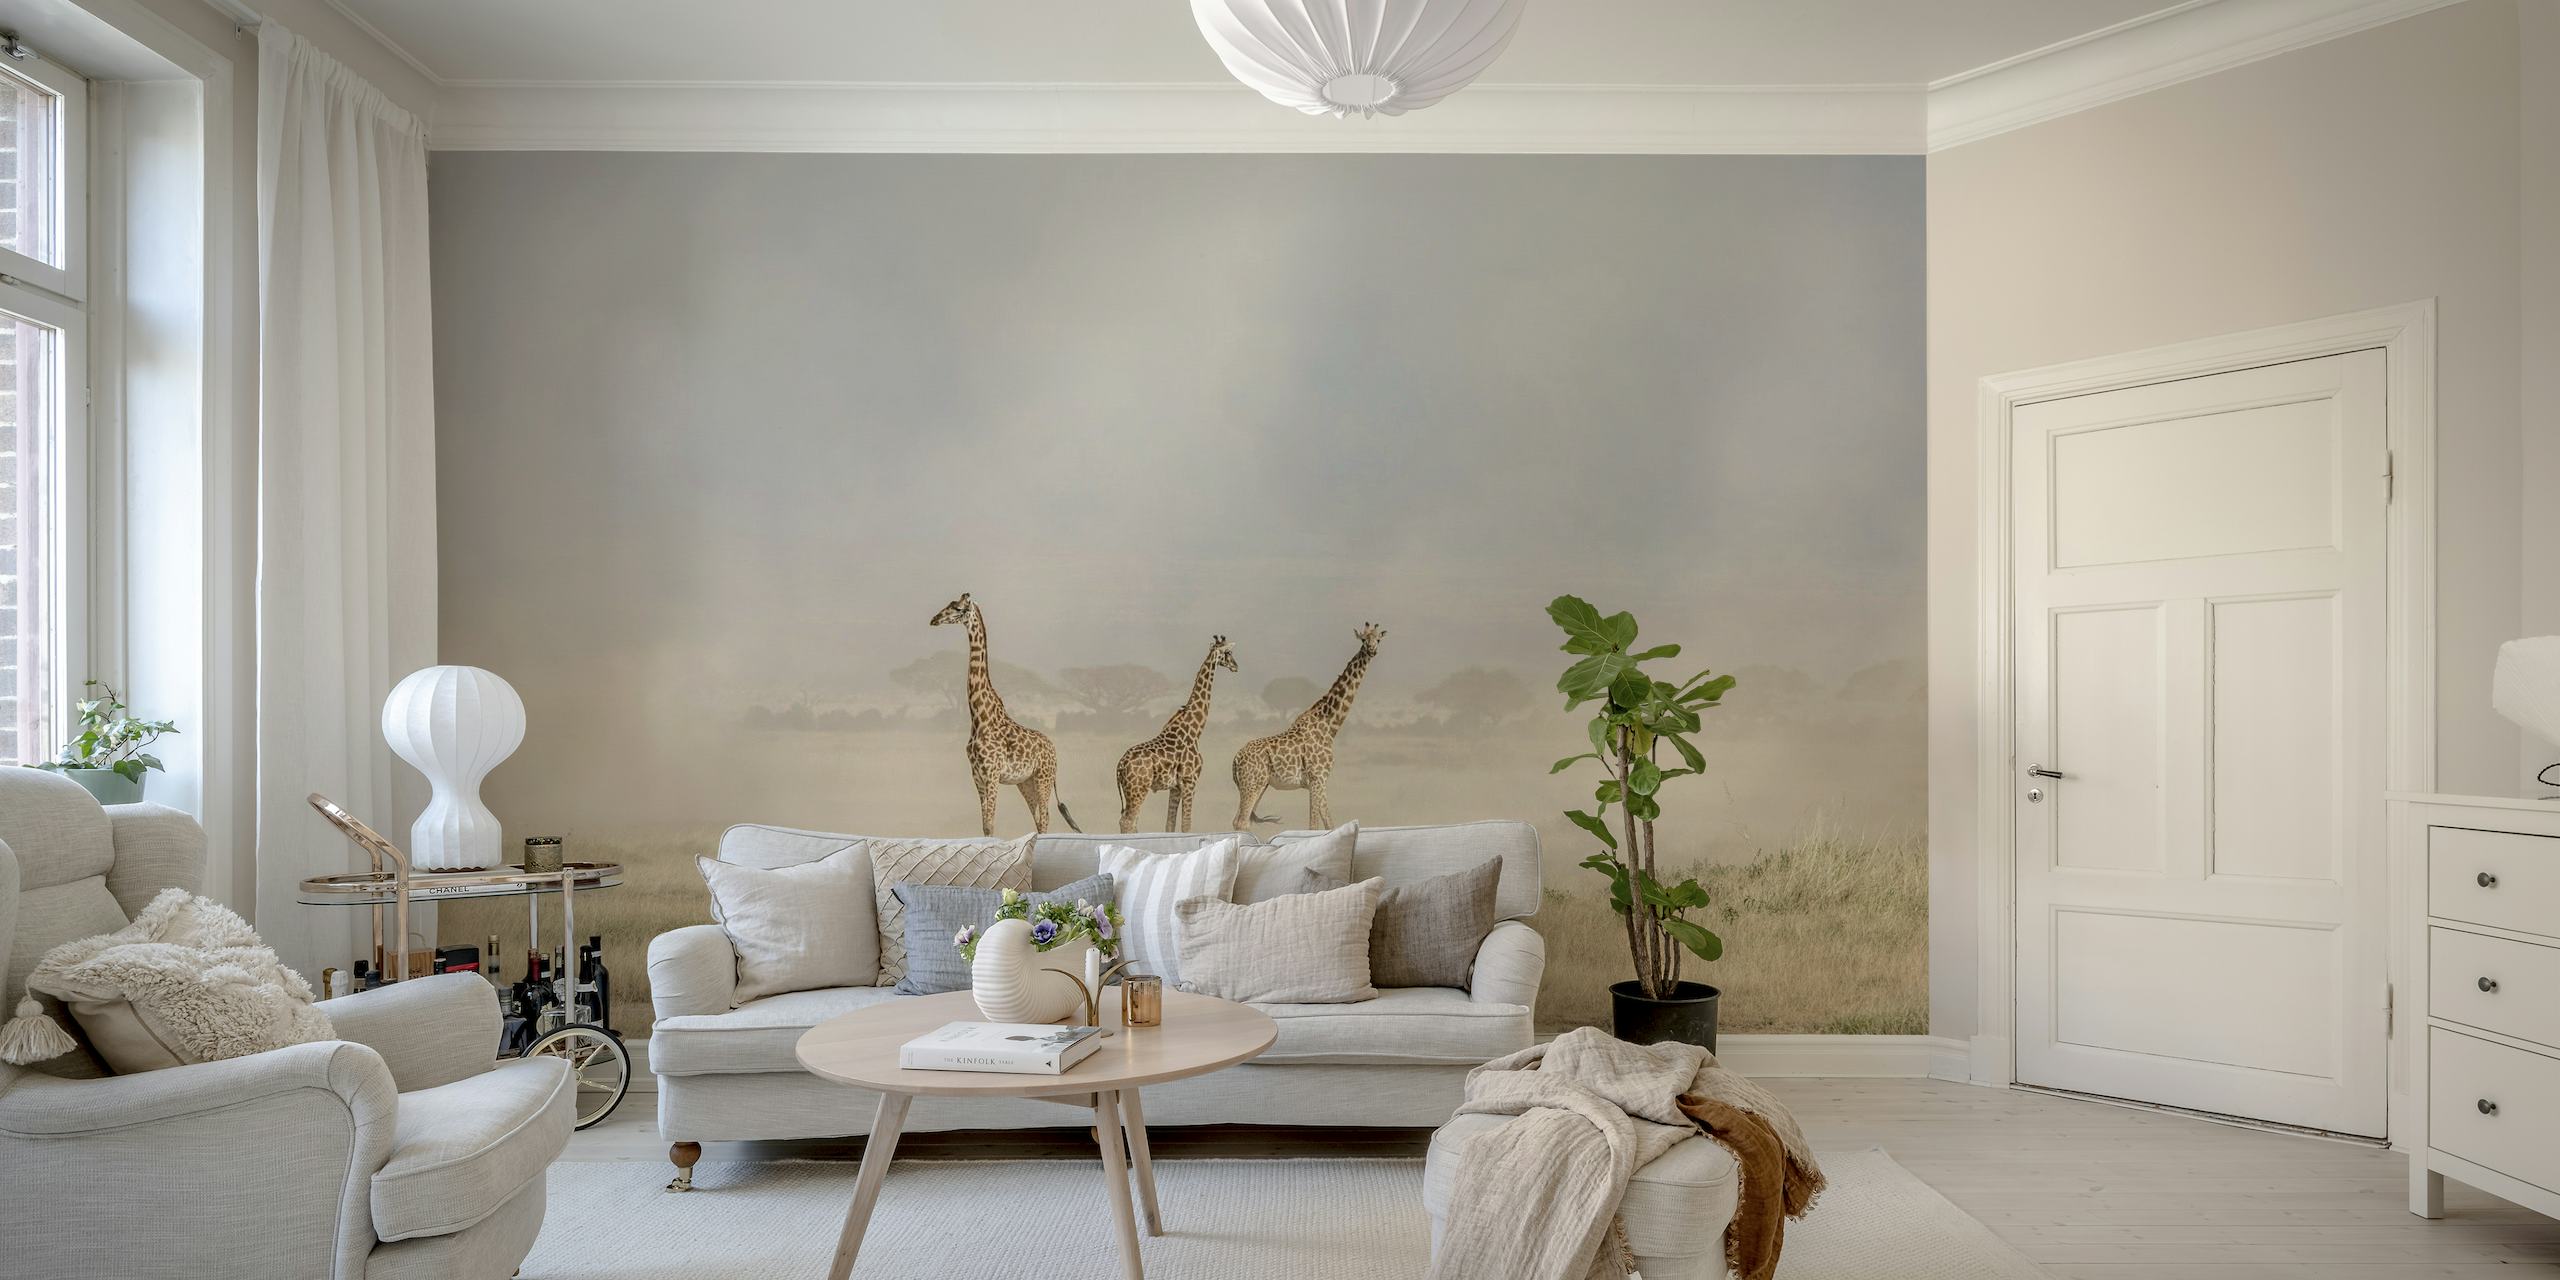 A wall mural depicting giraffes in the dusty Amboseli landscape with dust devils in the background.